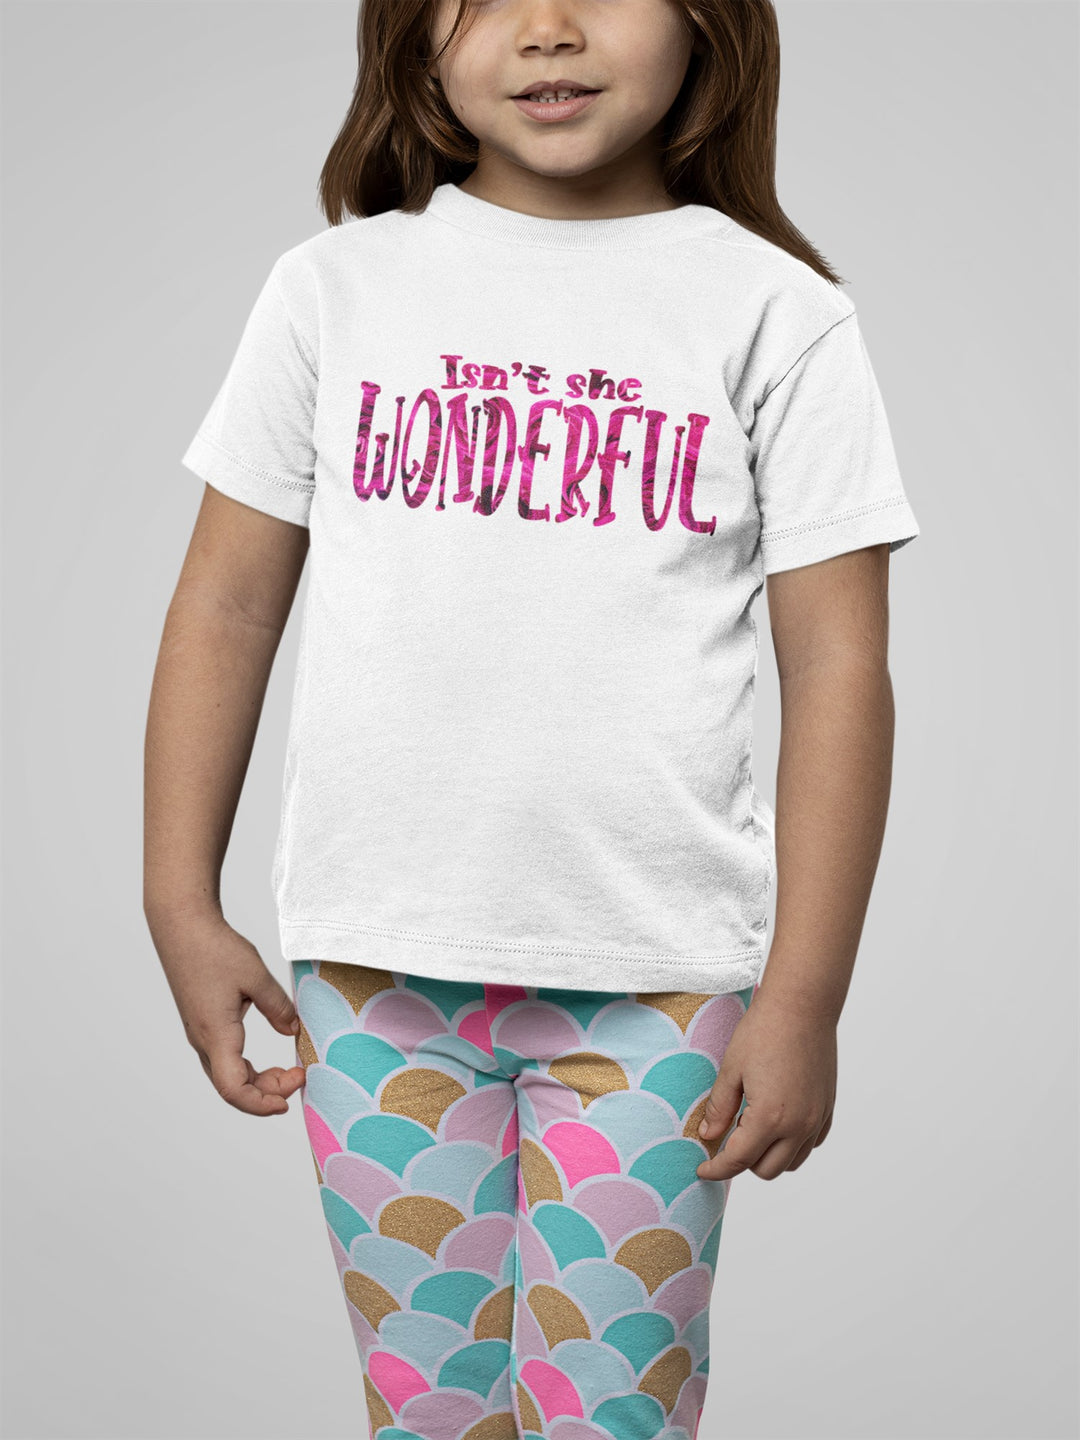 Isn't She Wonderful Pink Roses. Short Sleeve T Shirt For Toddler And Kids. - TeesForToddlersandKids -  t-shirt - holidays, Love - isnt-she-wonderful-pink-roses-short-sleeve-t-shirt-for-toddler-and-kids